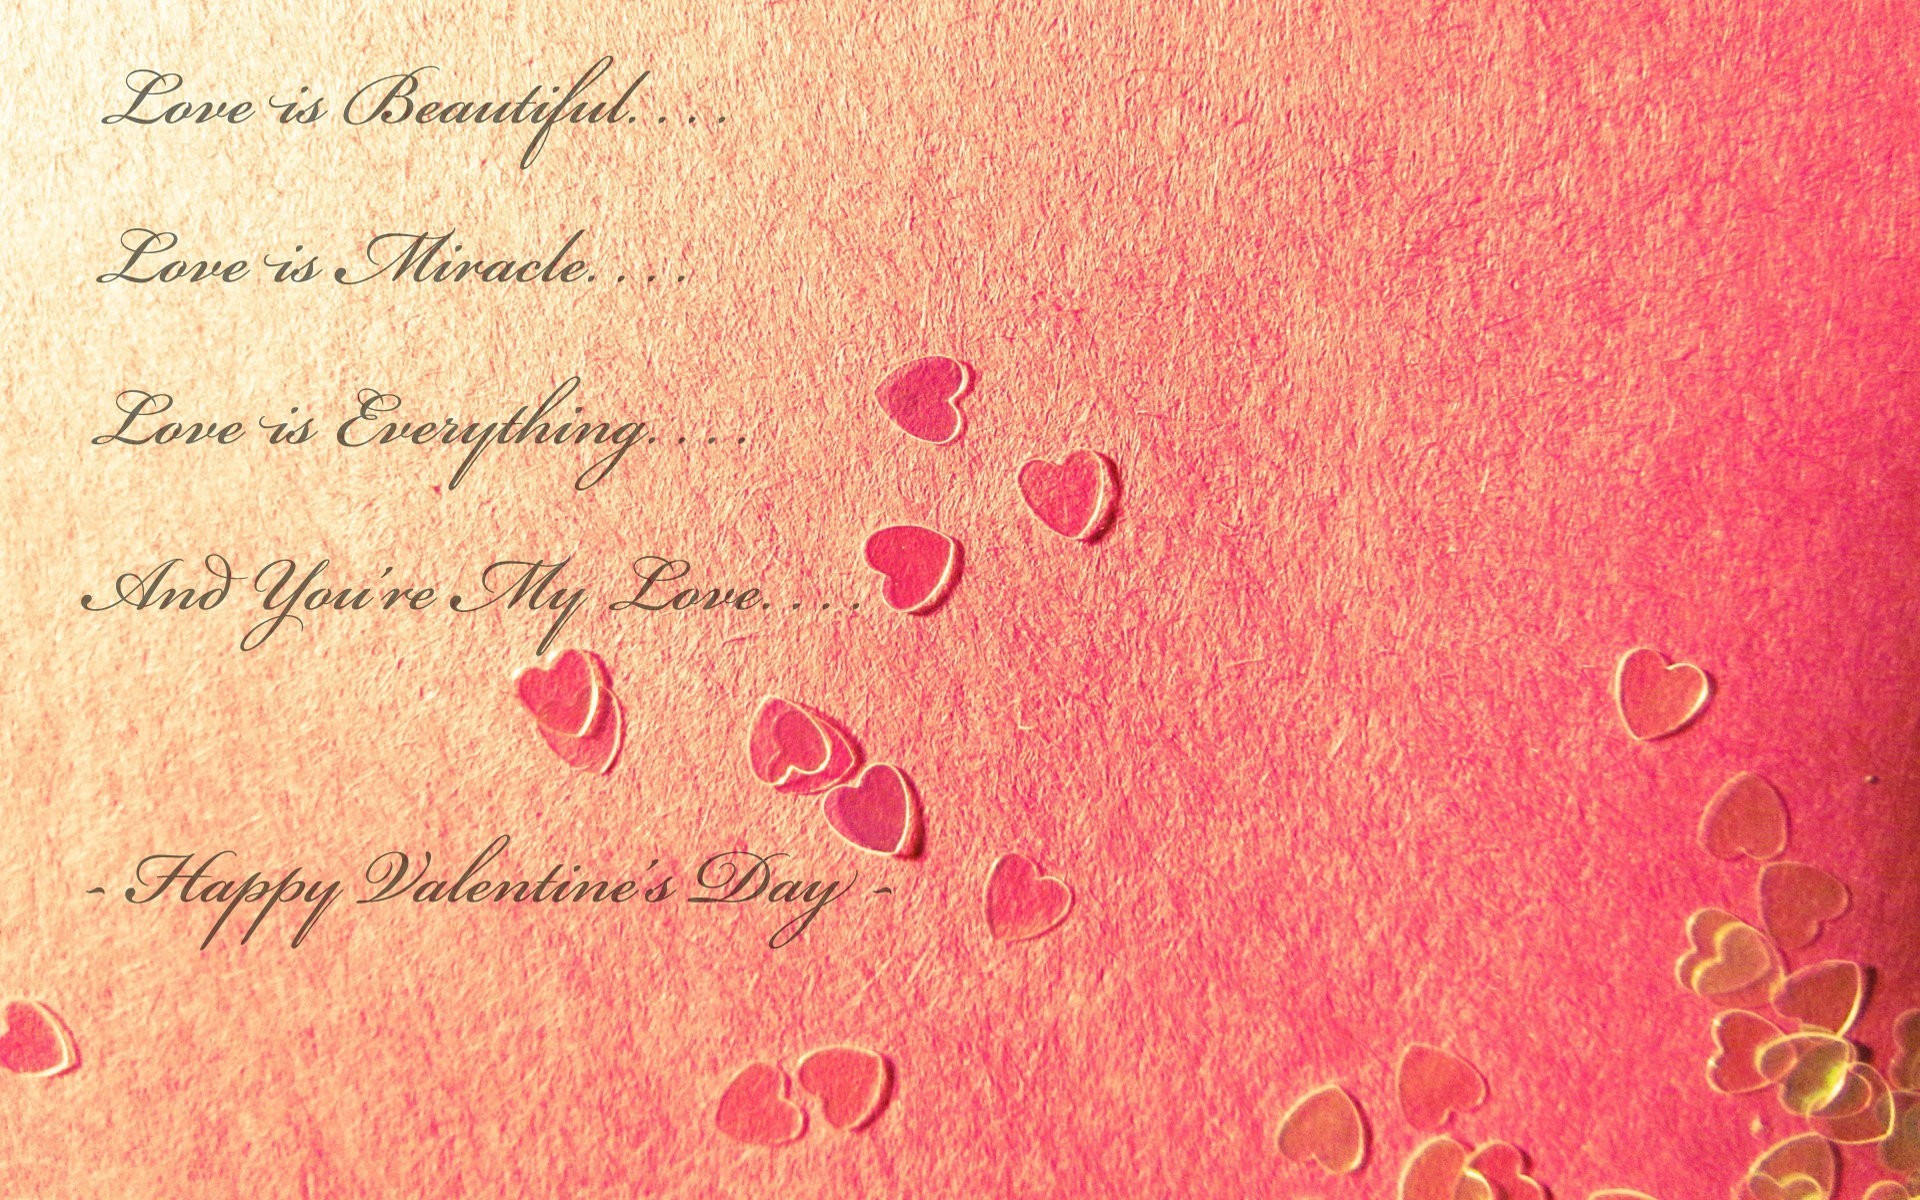 1920x1200  Happy Valentines Day Wallpapers 2017 a gift to all. Valentine's  day is approaching and these cute and lovely Valentine's wallpapers are for  your ...